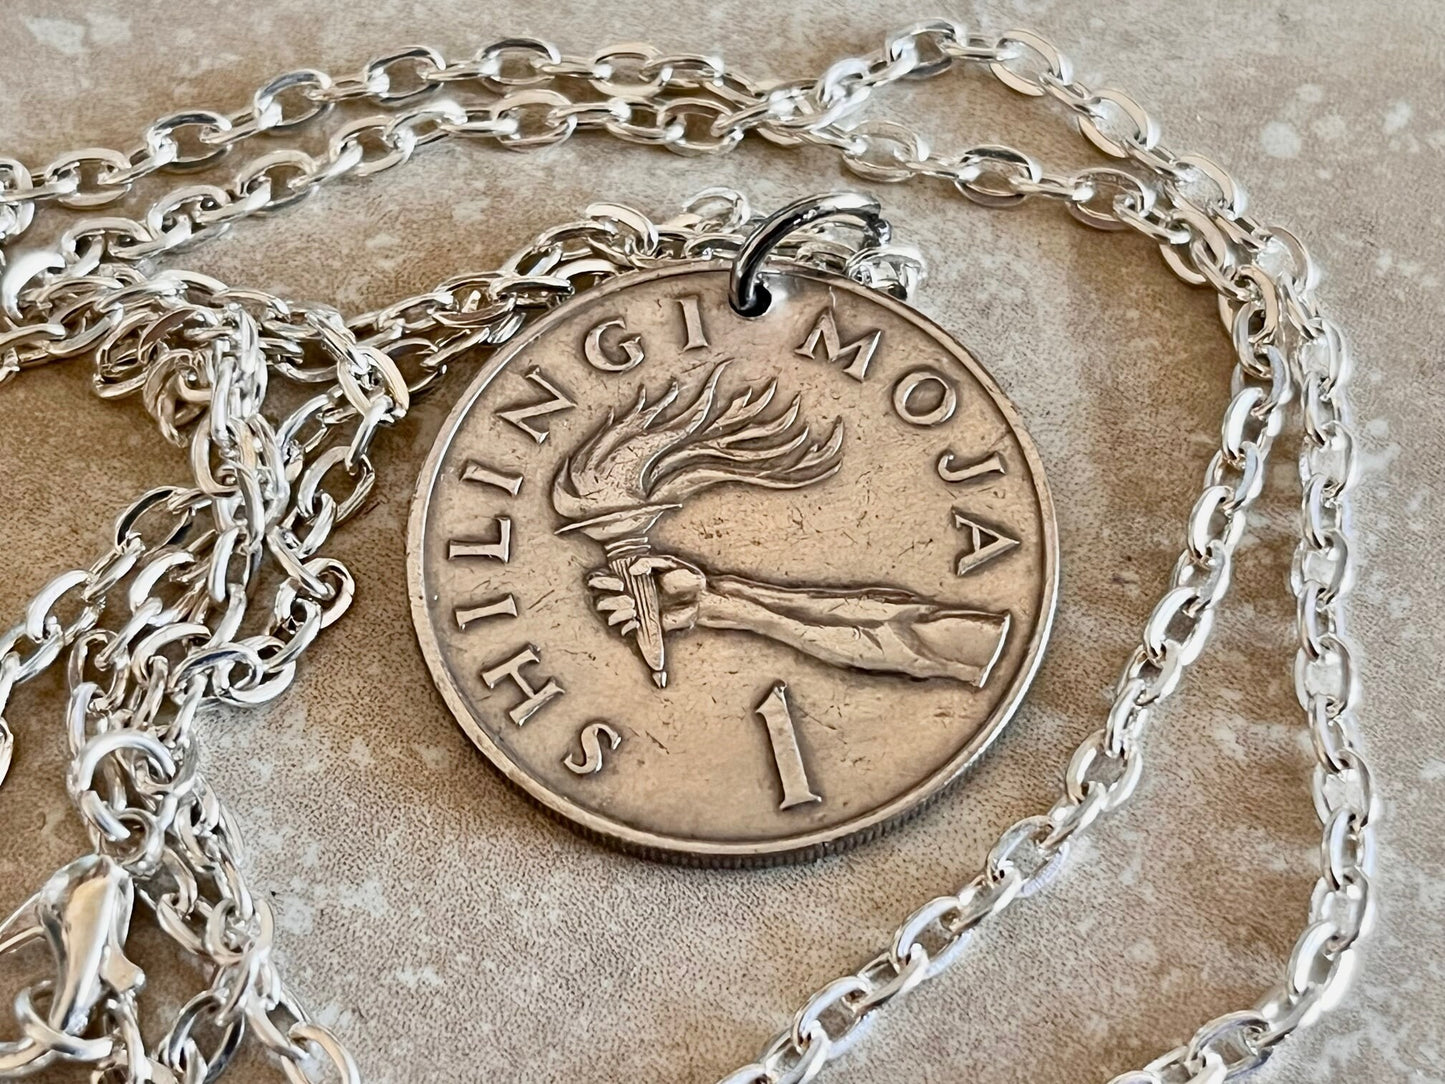 Tanzania 1 Shilling Moja Coin Pendant Necklace Tanzanian Personal Handmade Jewelry Gift Friend Charm For Him Her World Coin Collector